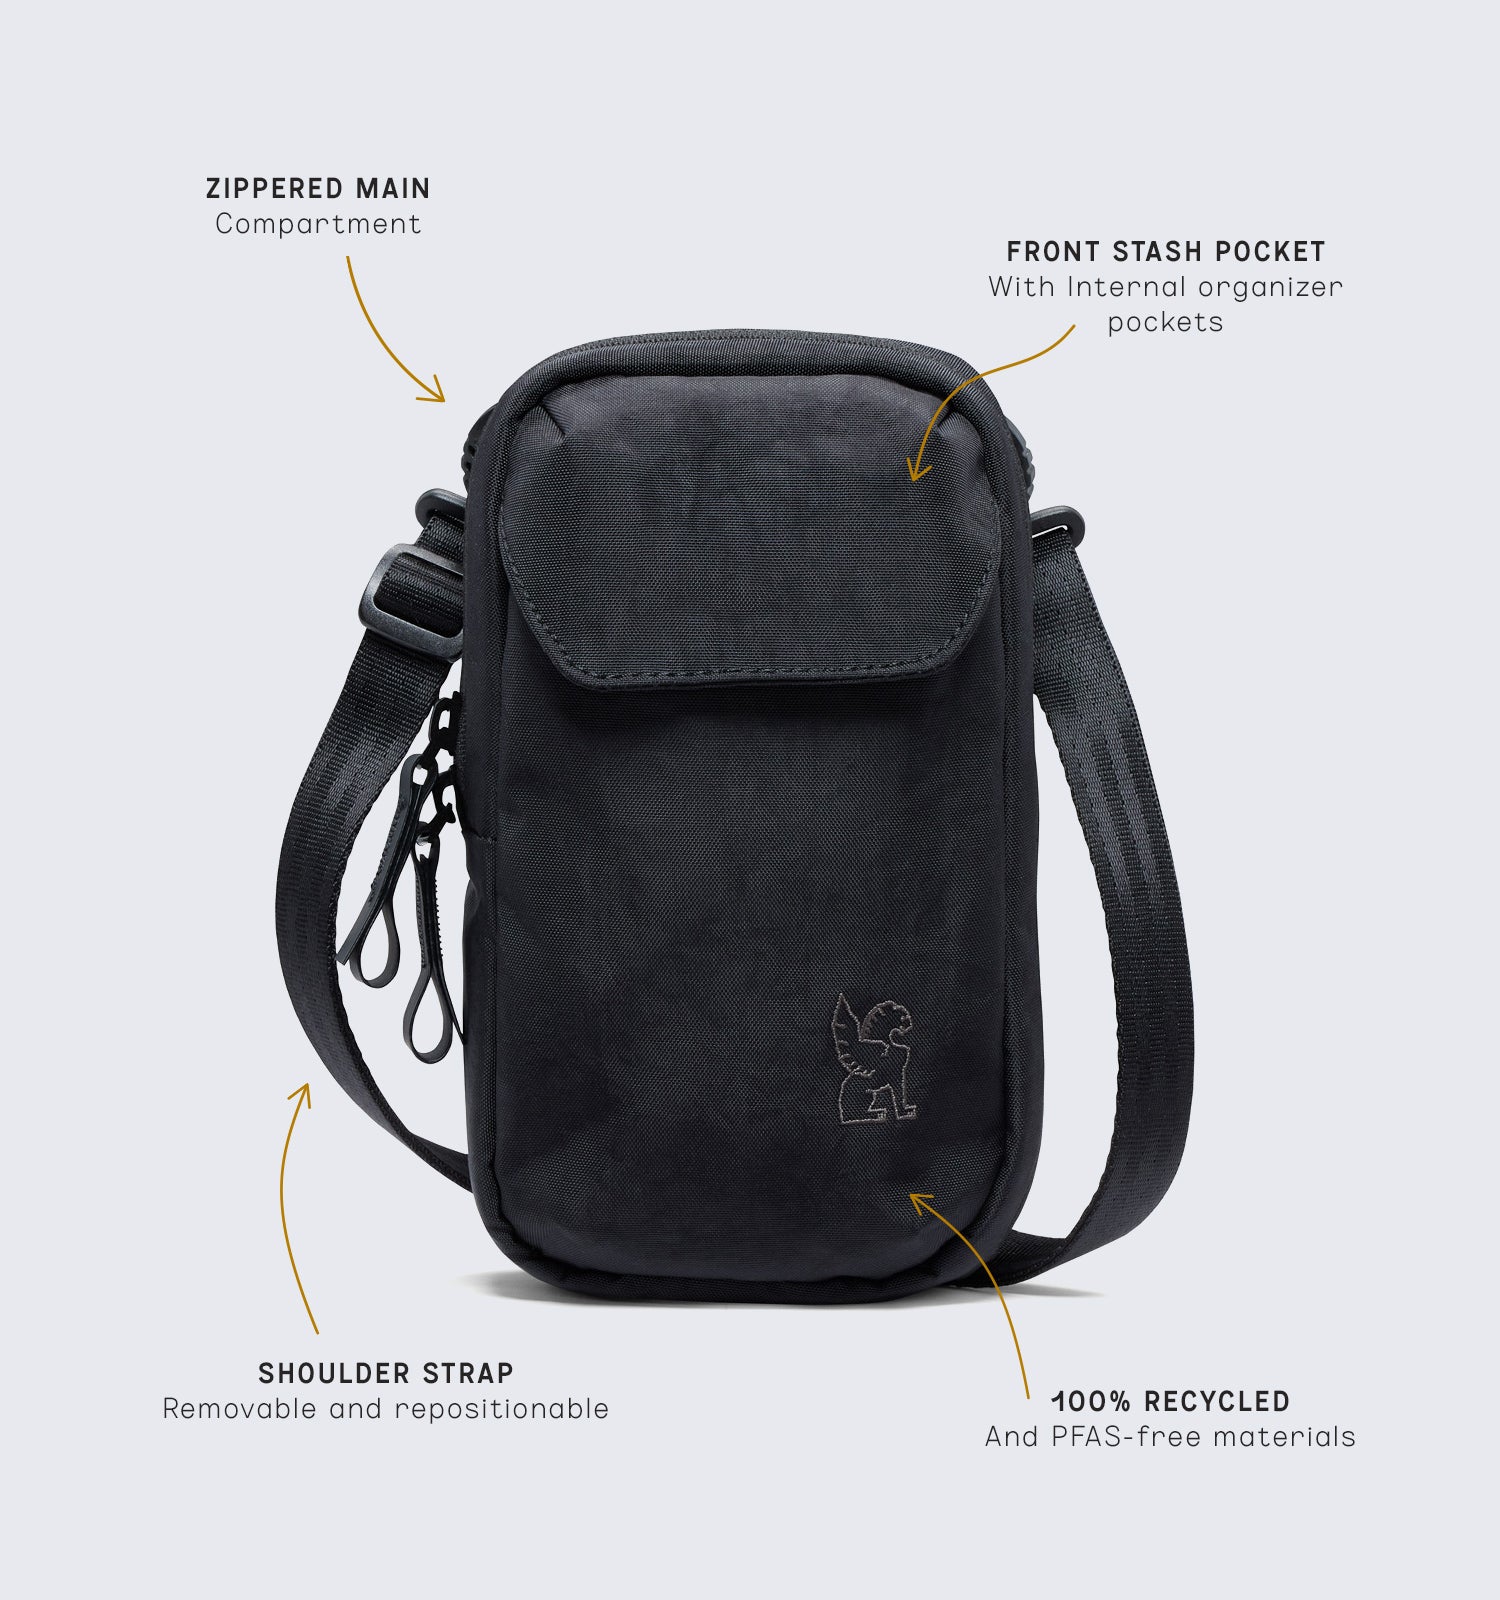 Features of the Logan pouch